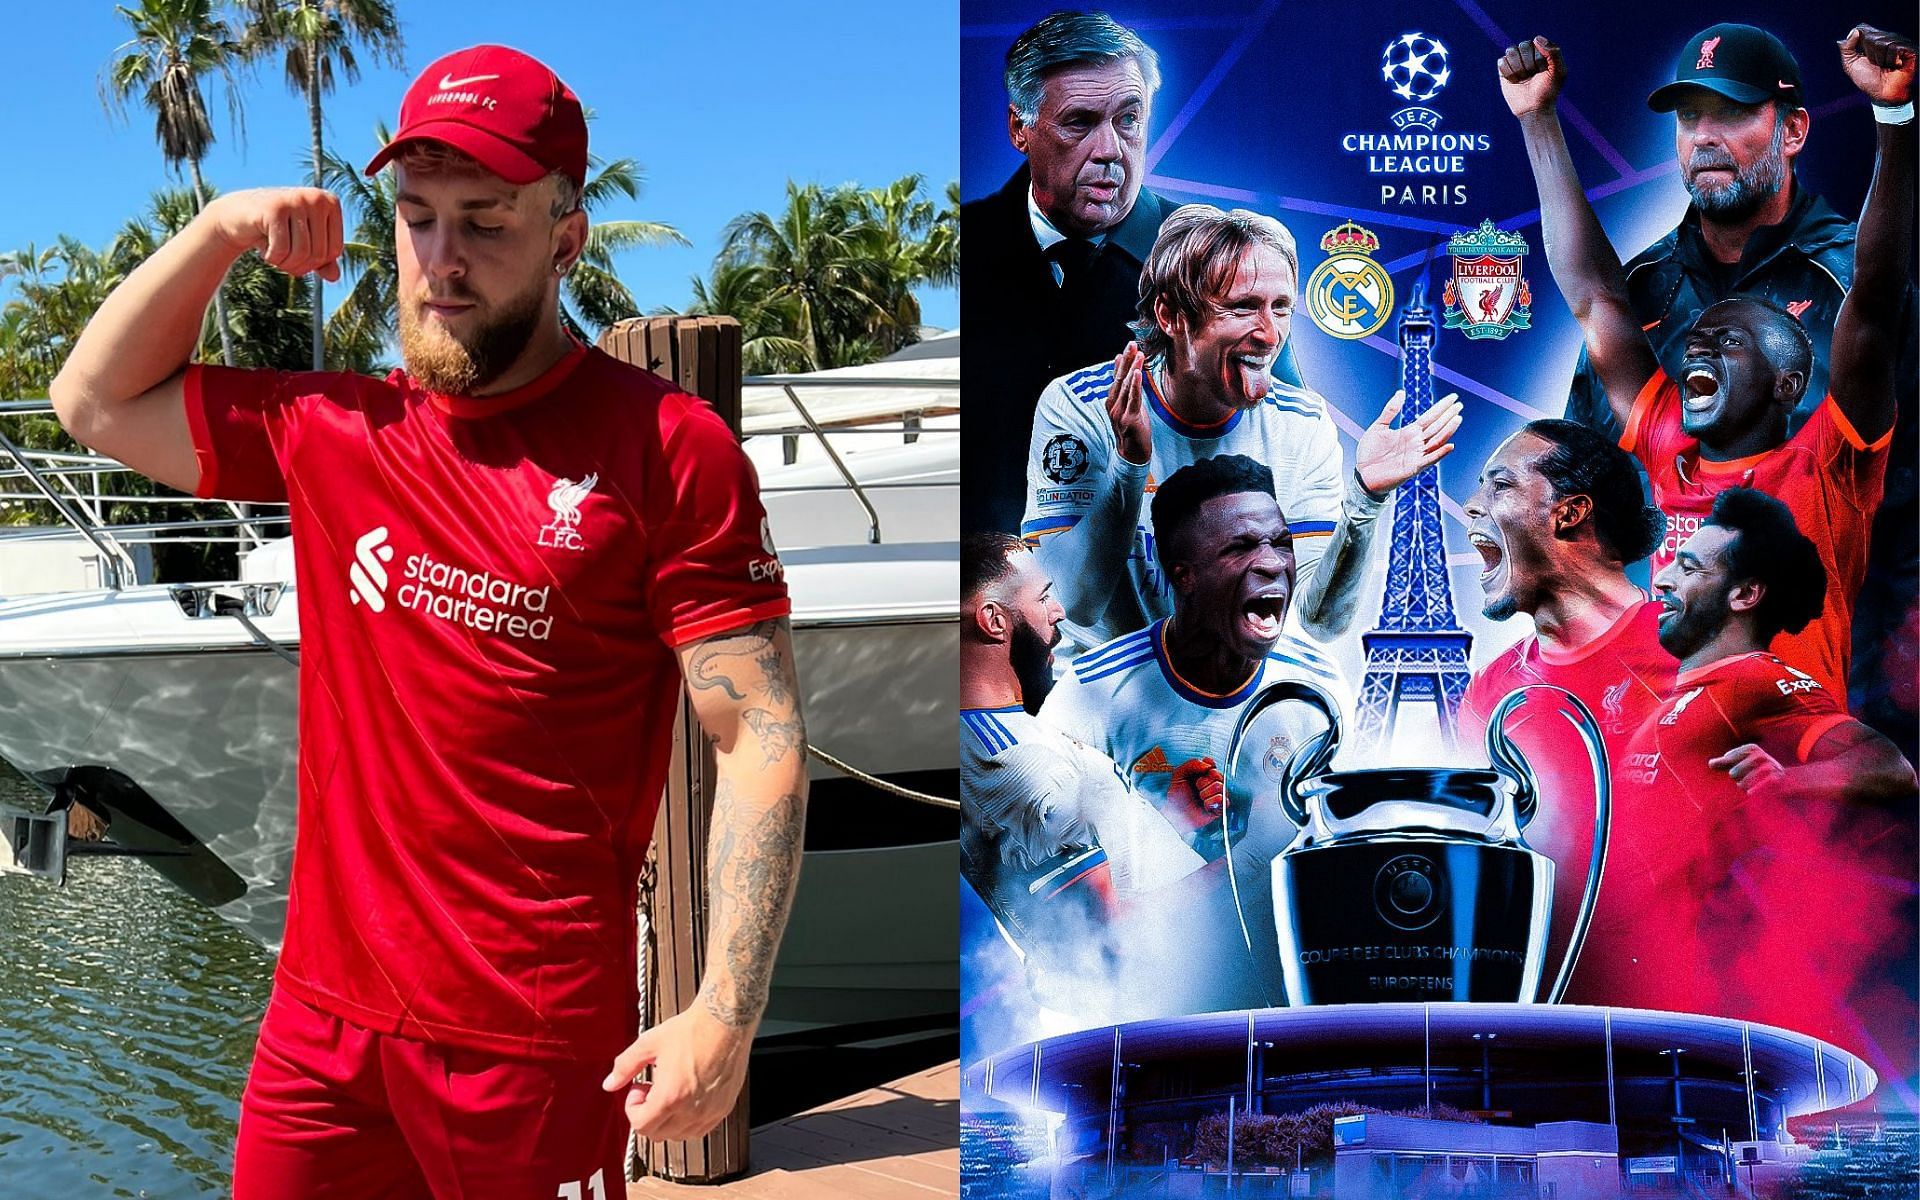 Jake Paul (L) sends an encouraging video to Liverpool ahead of their Champions League Final. [ credits; Jake Paul via his official twitter handle; UEFA graphic poster via. twitter/Sportskeedafootball]